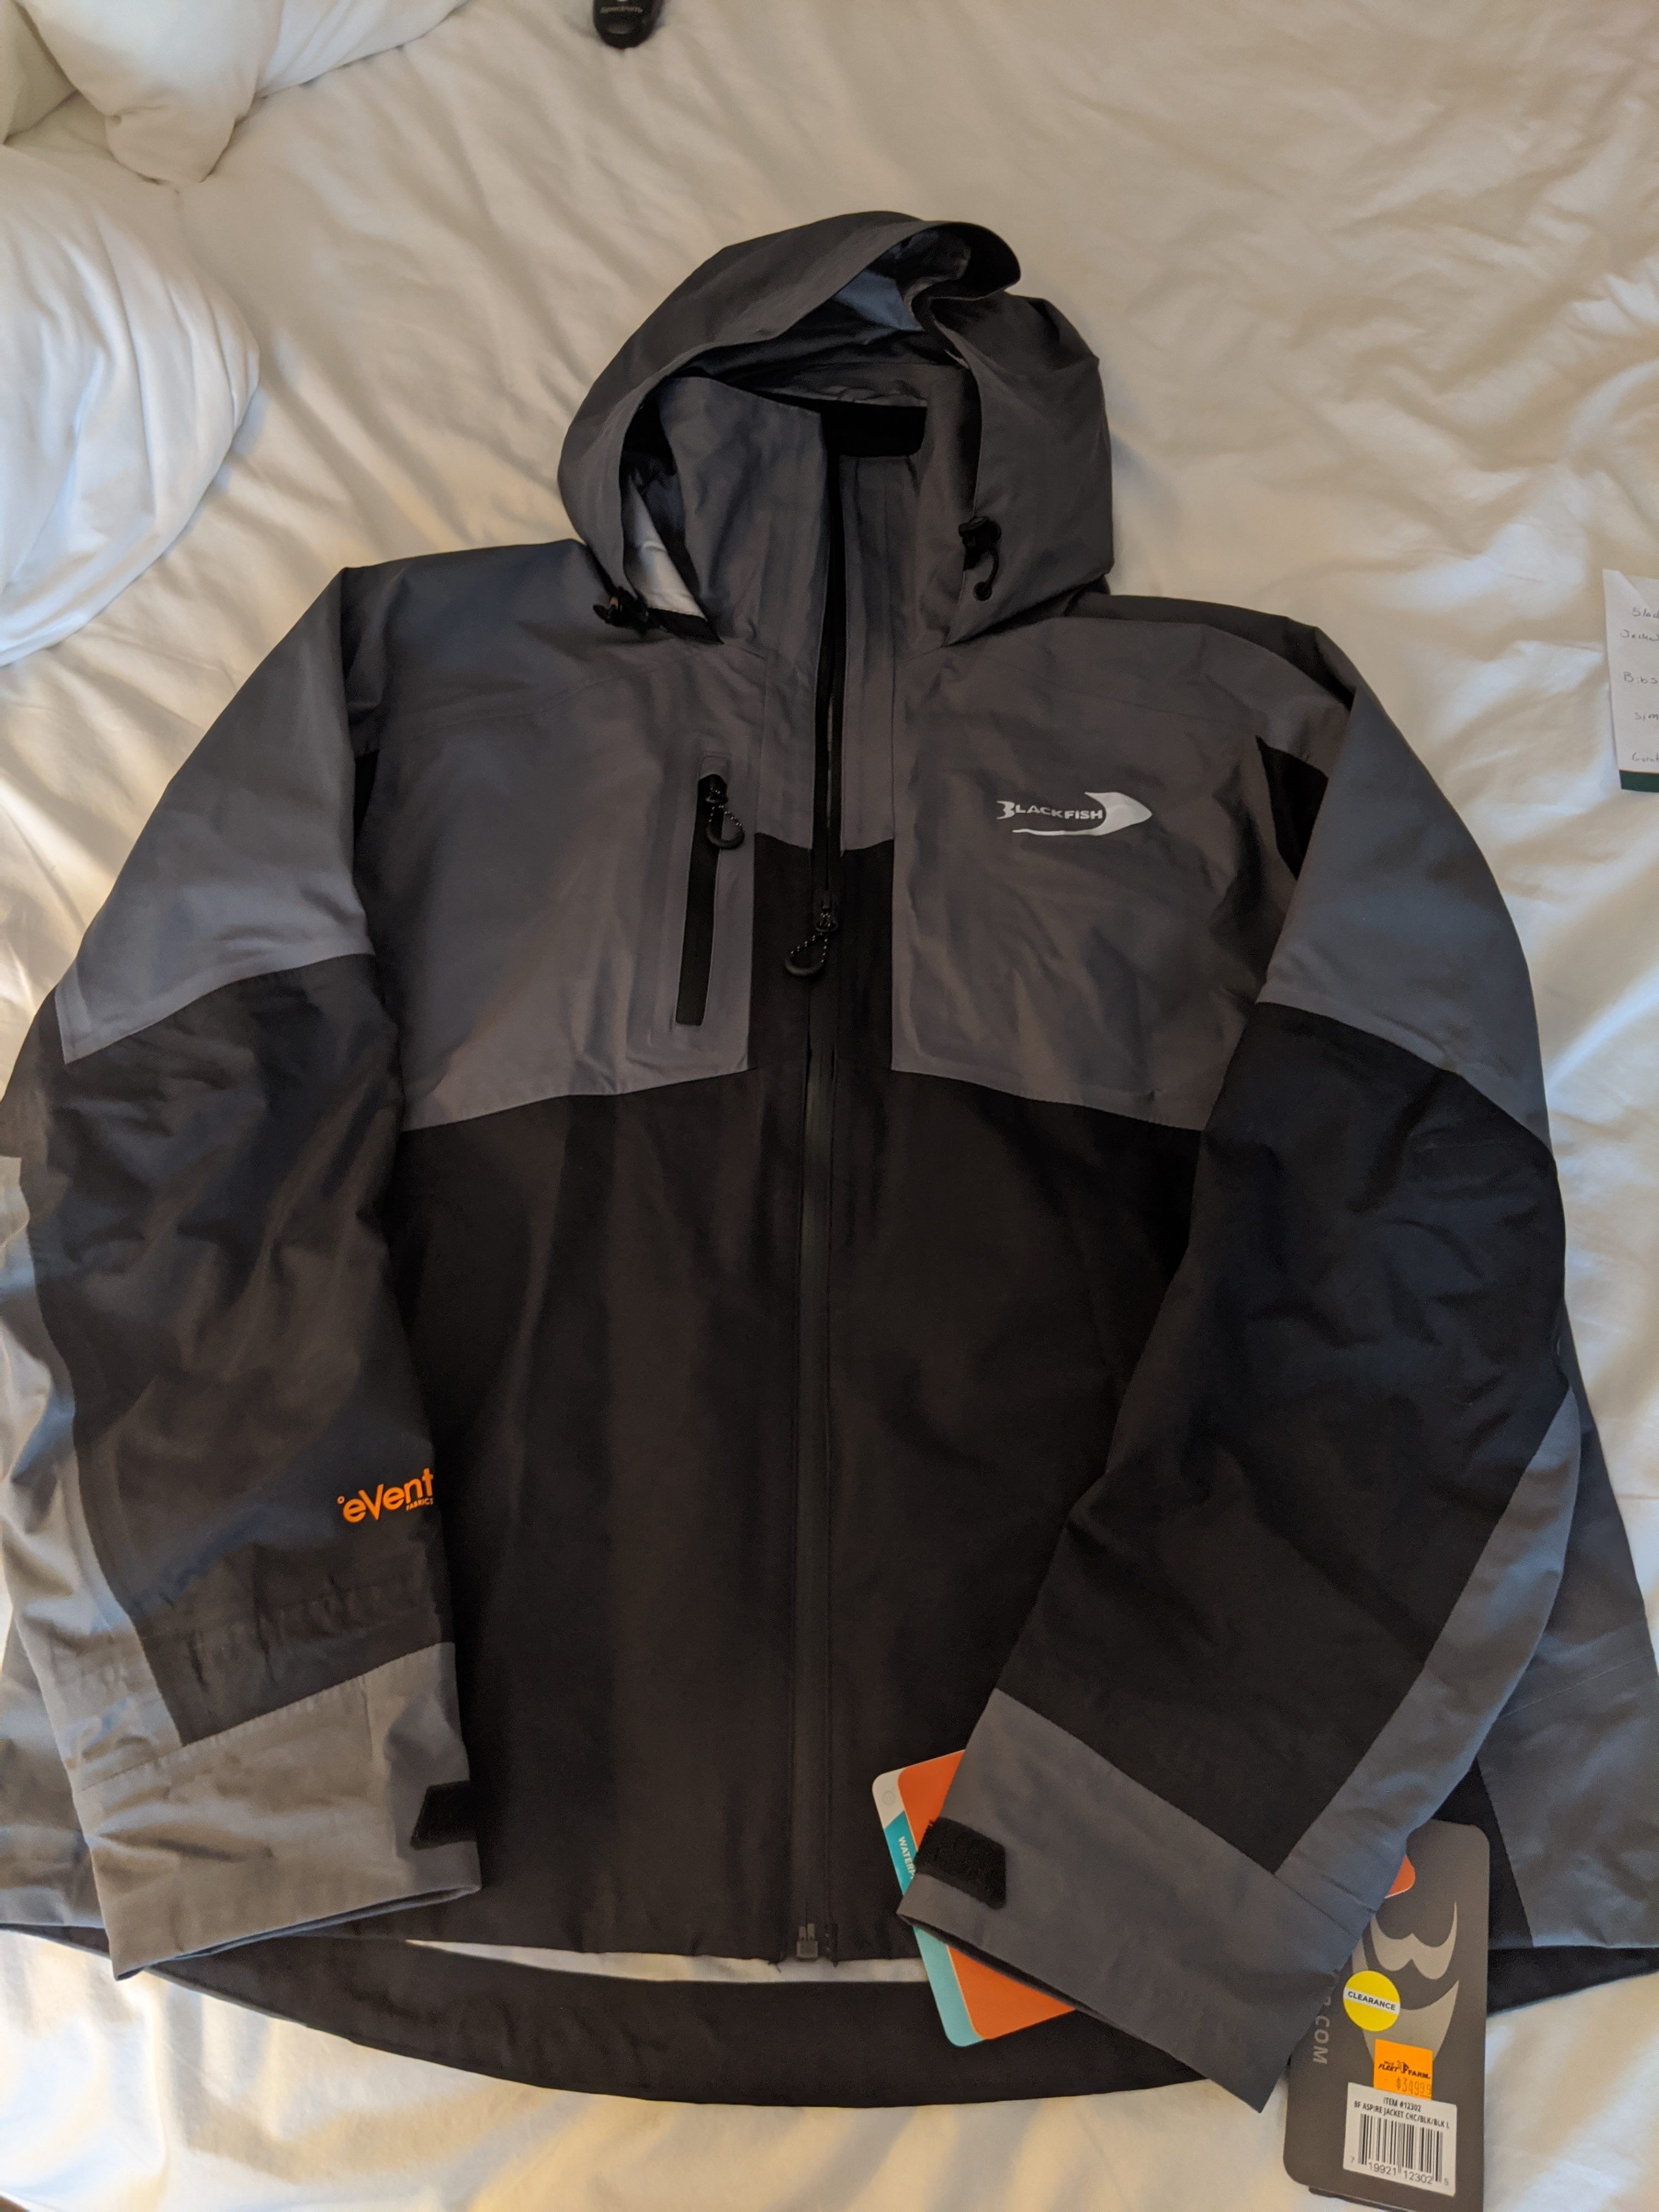 SIMMS CHALLENGER JACKETS FOR $37 !!! - Classified Ads | In-Depth Outdoors